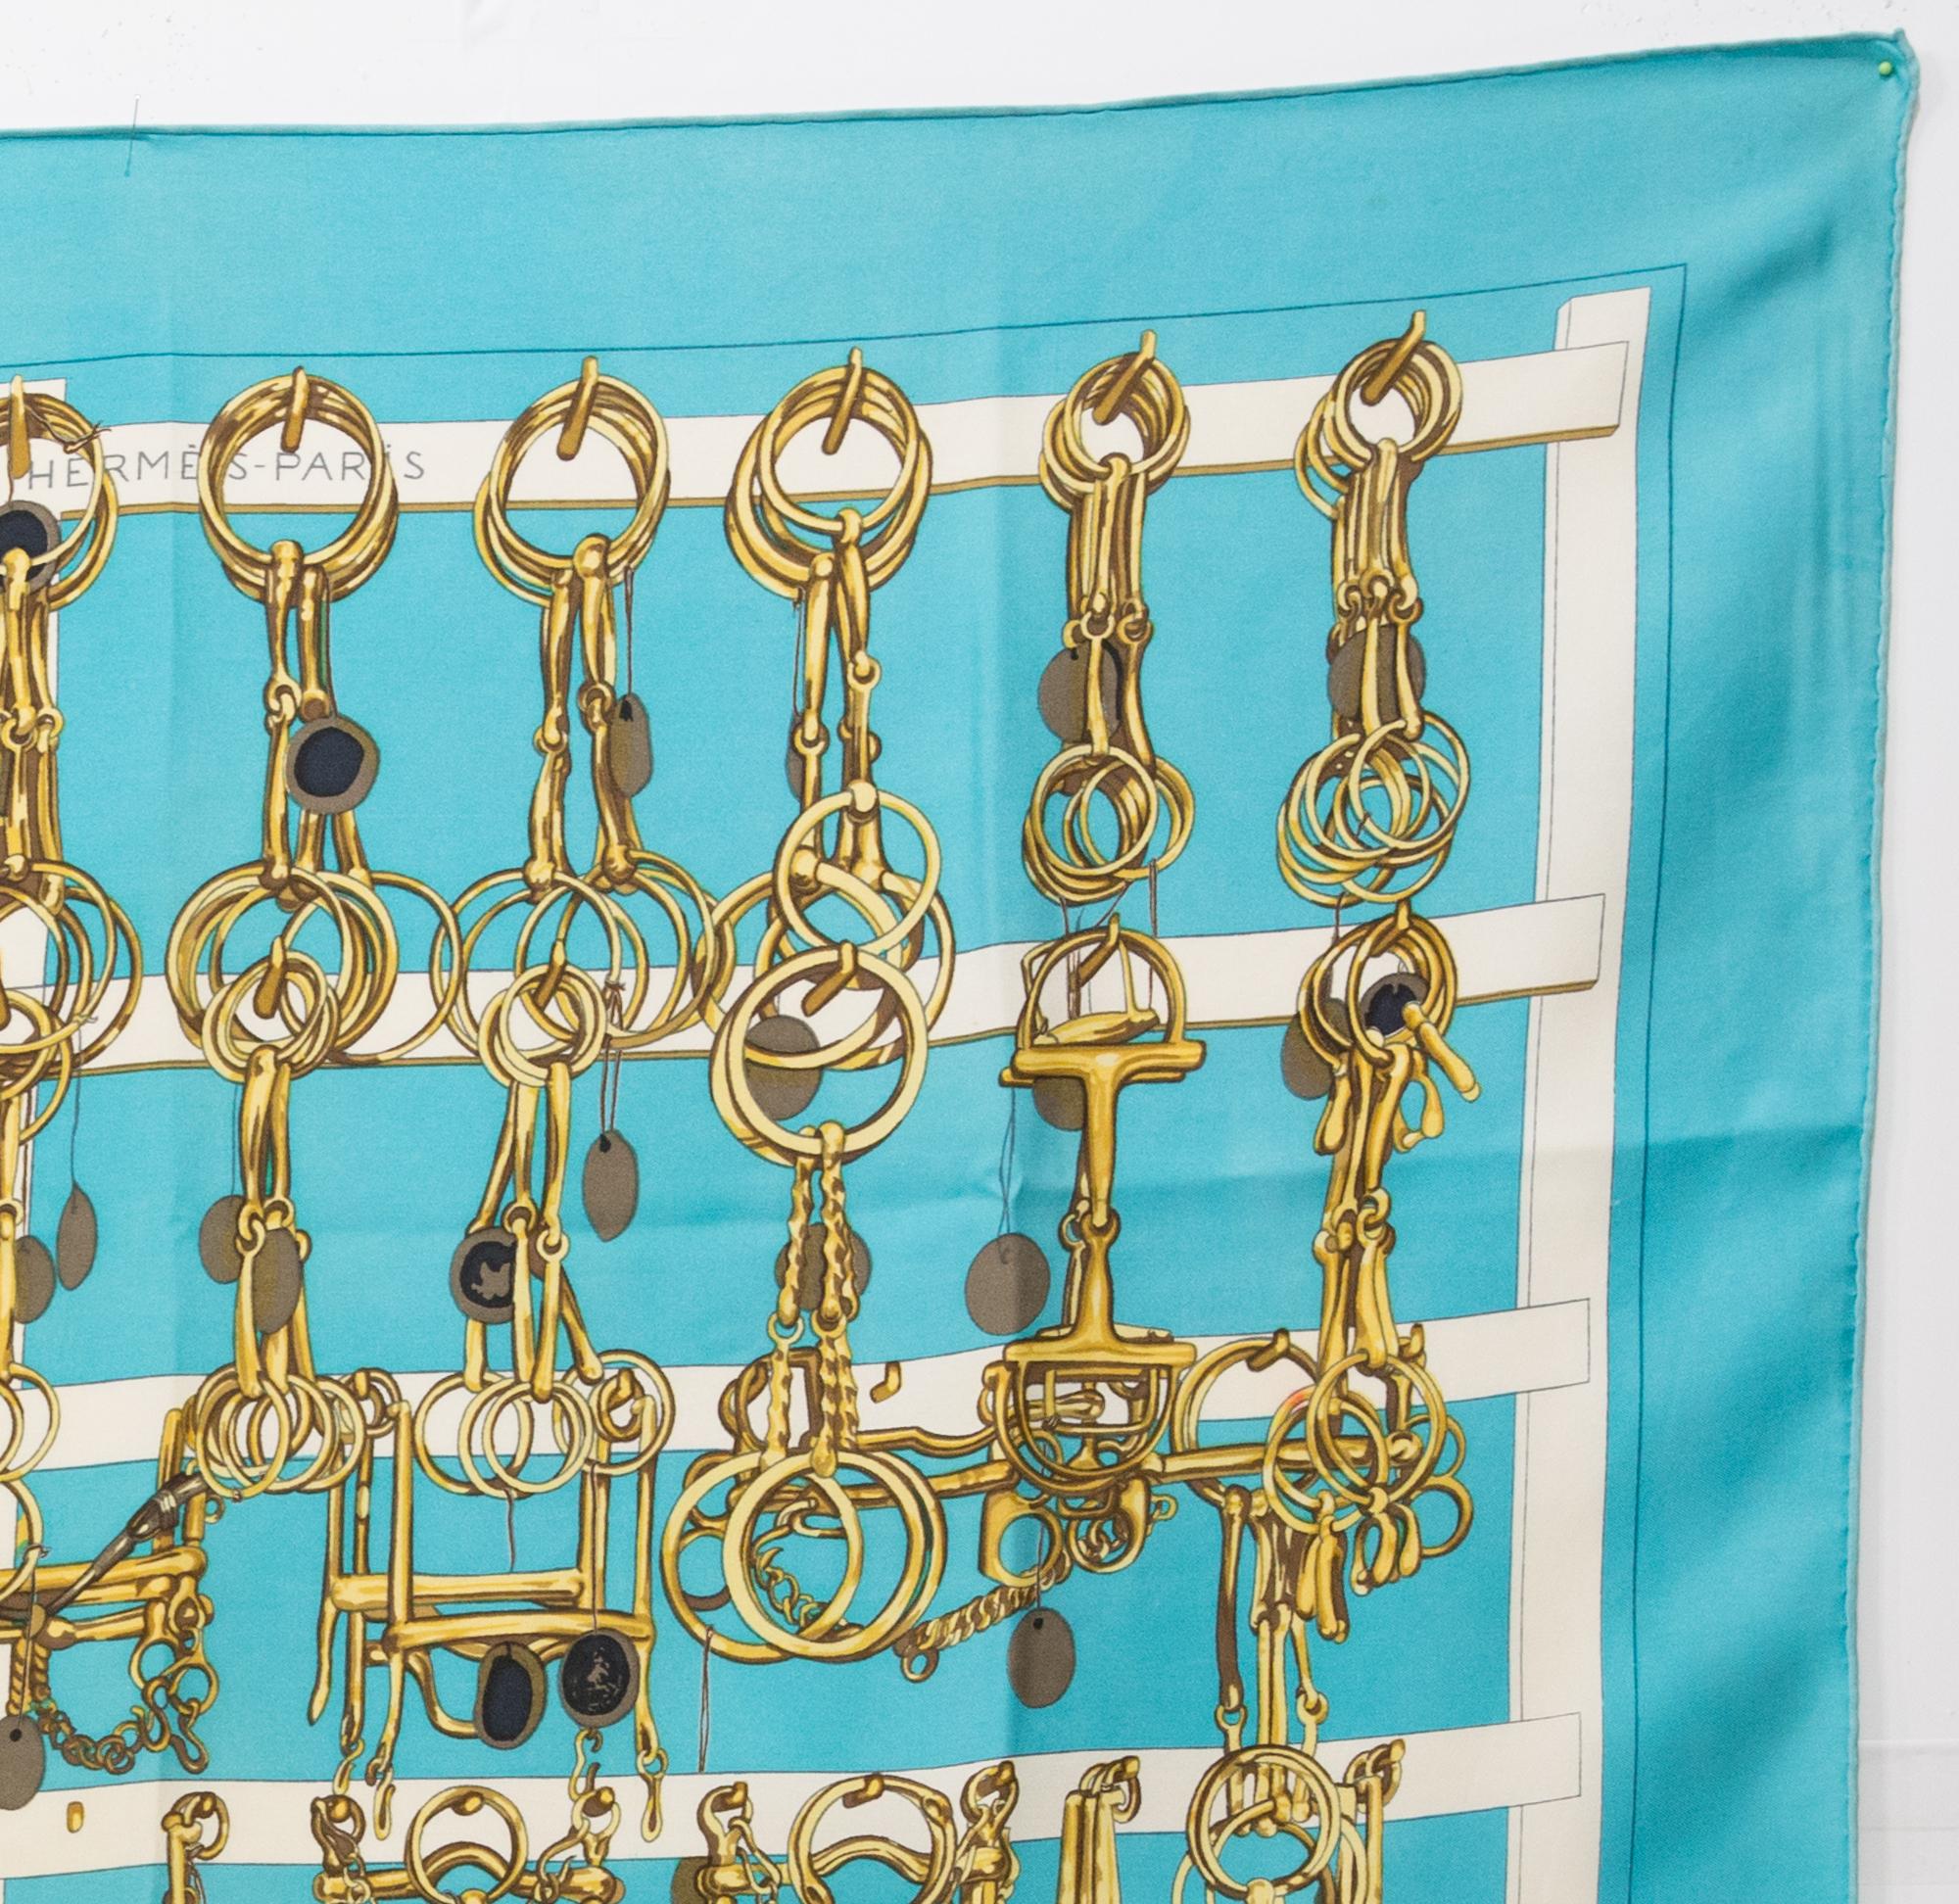 1966 Hermes Mors et Filets by M F Heron Silk Scarf In Good Condition For Sale In Paris, FR